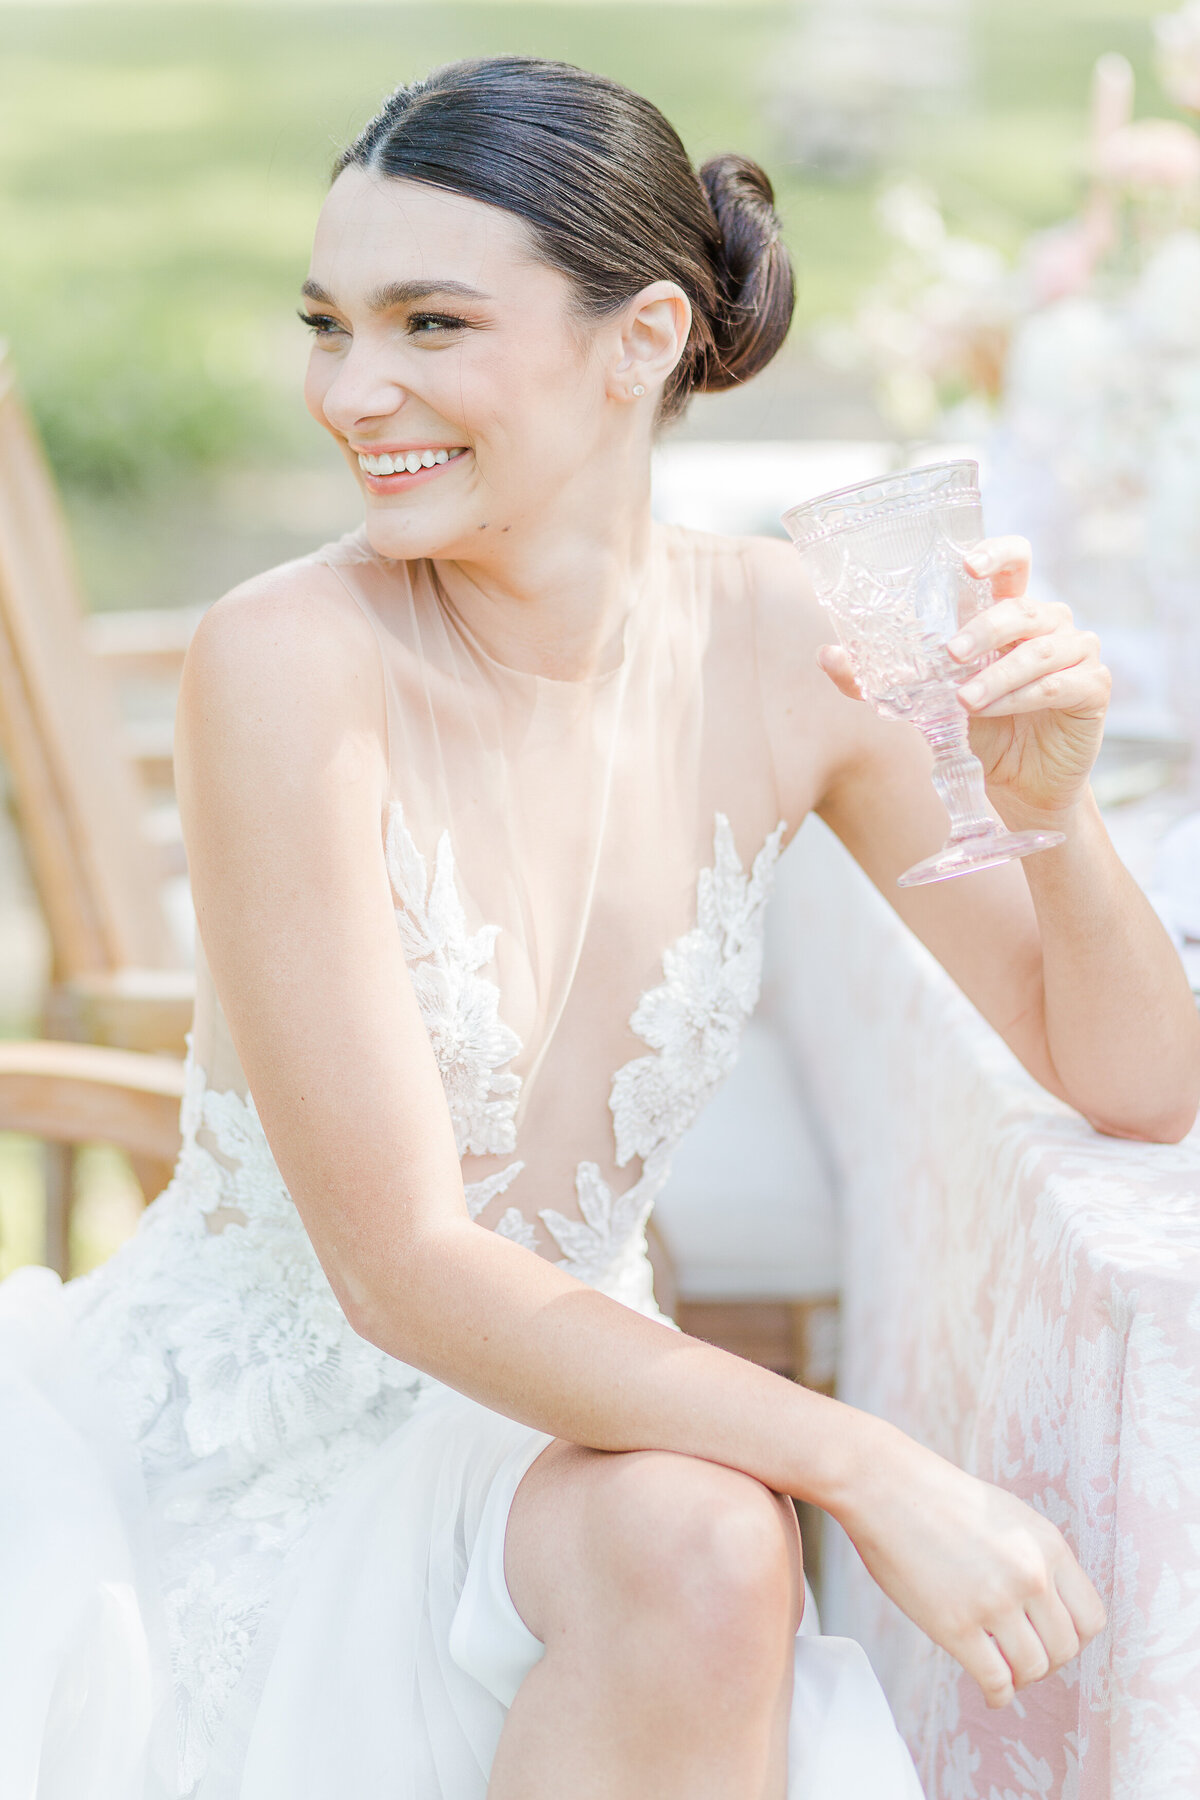 A bride is captured casually sitting at a table for a candid portrait. The bride is sitting with her leg crossed and she is looking over her shoulder smiling